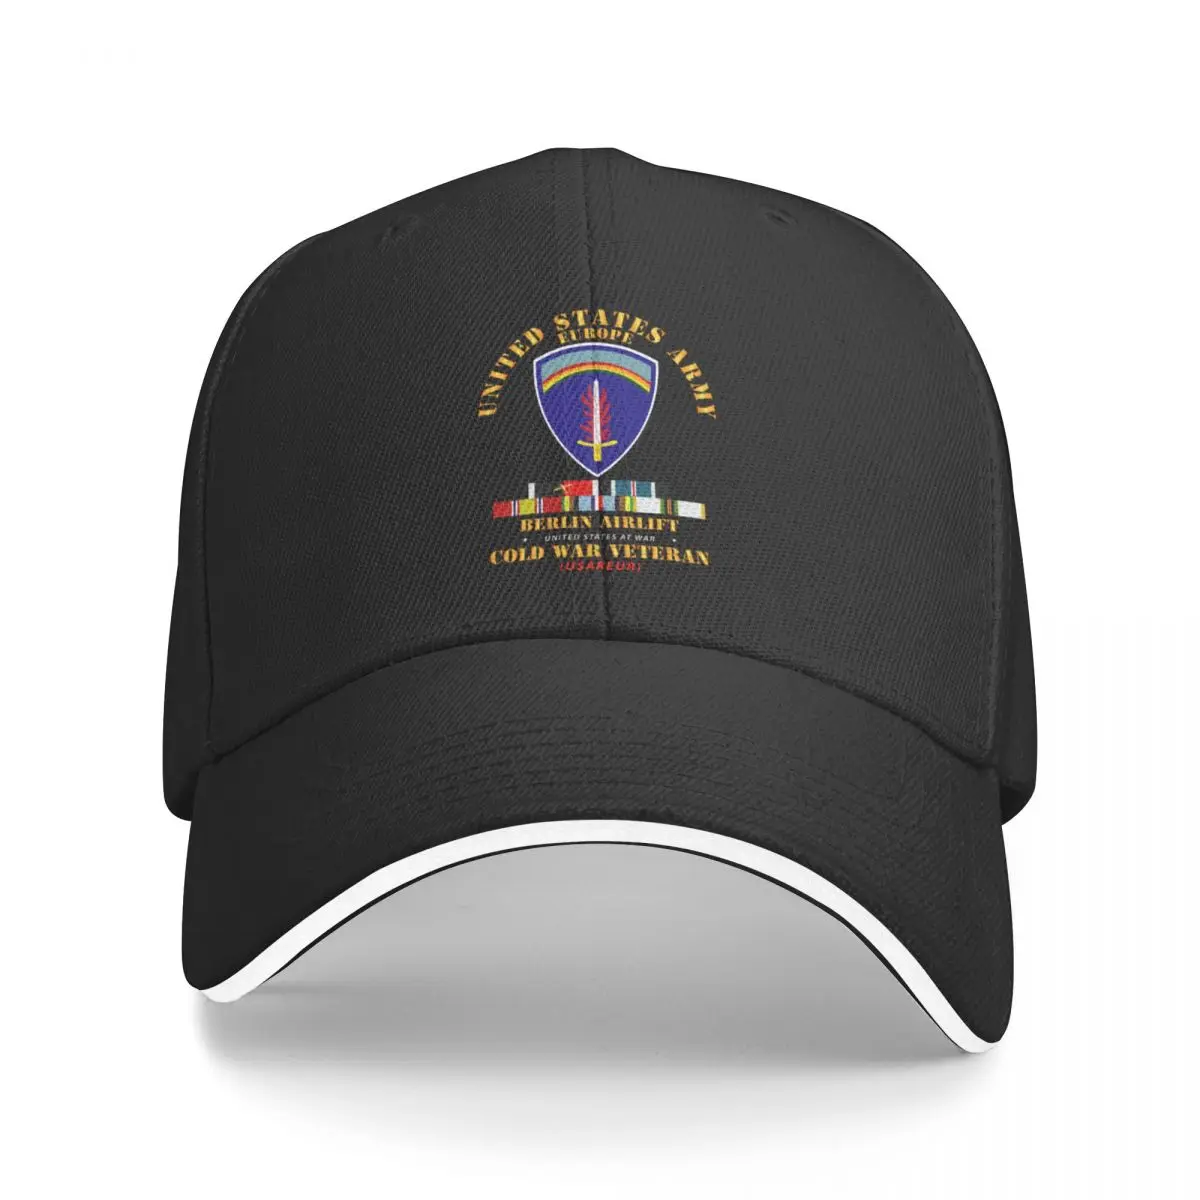 

Army - US Army Europe - Berlin Airlift w COLD EXP OCCP Airplane SVC Baseball Cap Snap Back Hat Hip Hop Baseball Men Women's